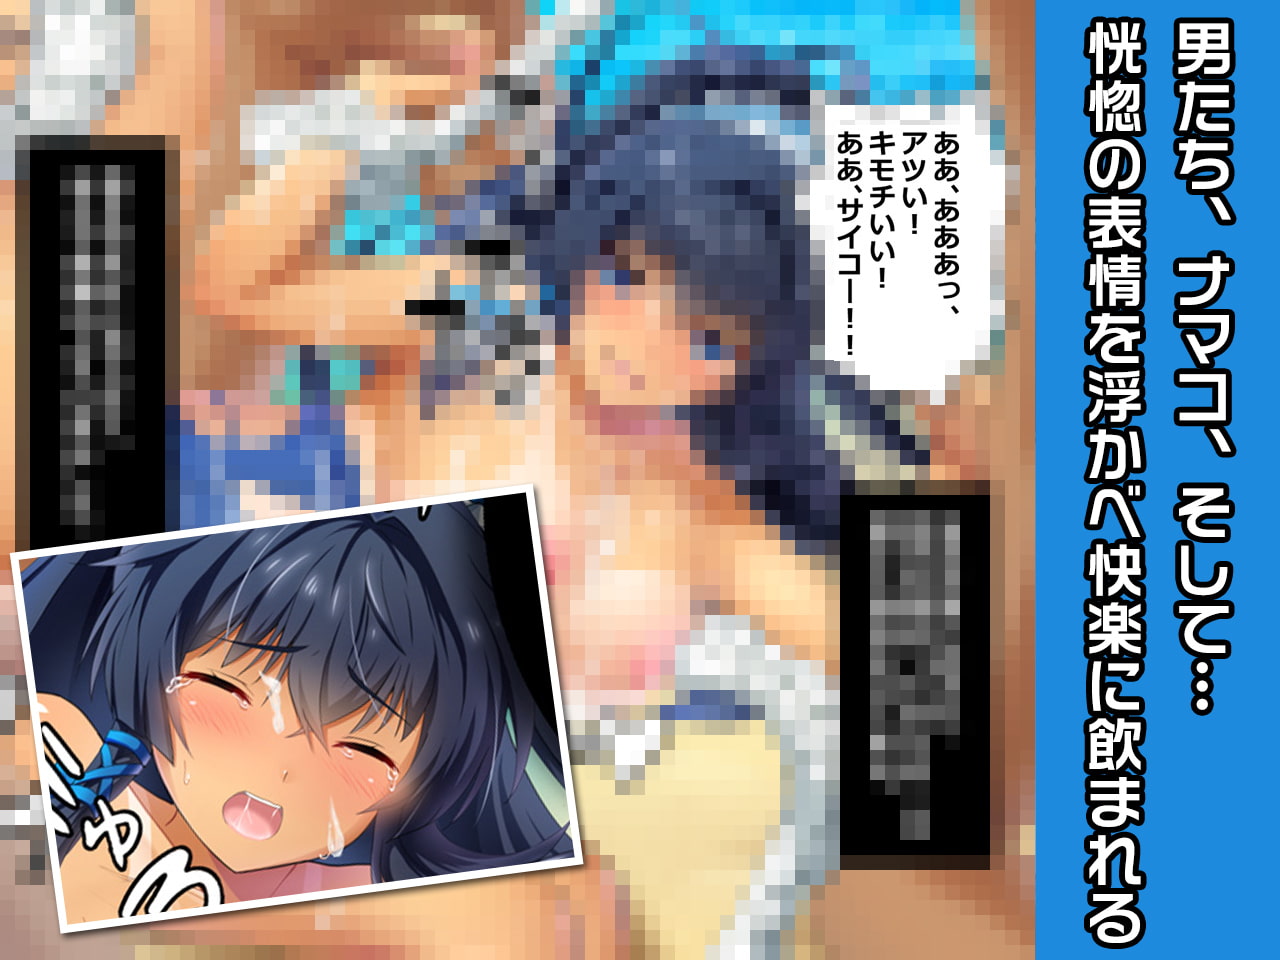 Milky Swimsuit Special ~Heroine Destruction Project~ Corrupt the Strong Willed Heroine!